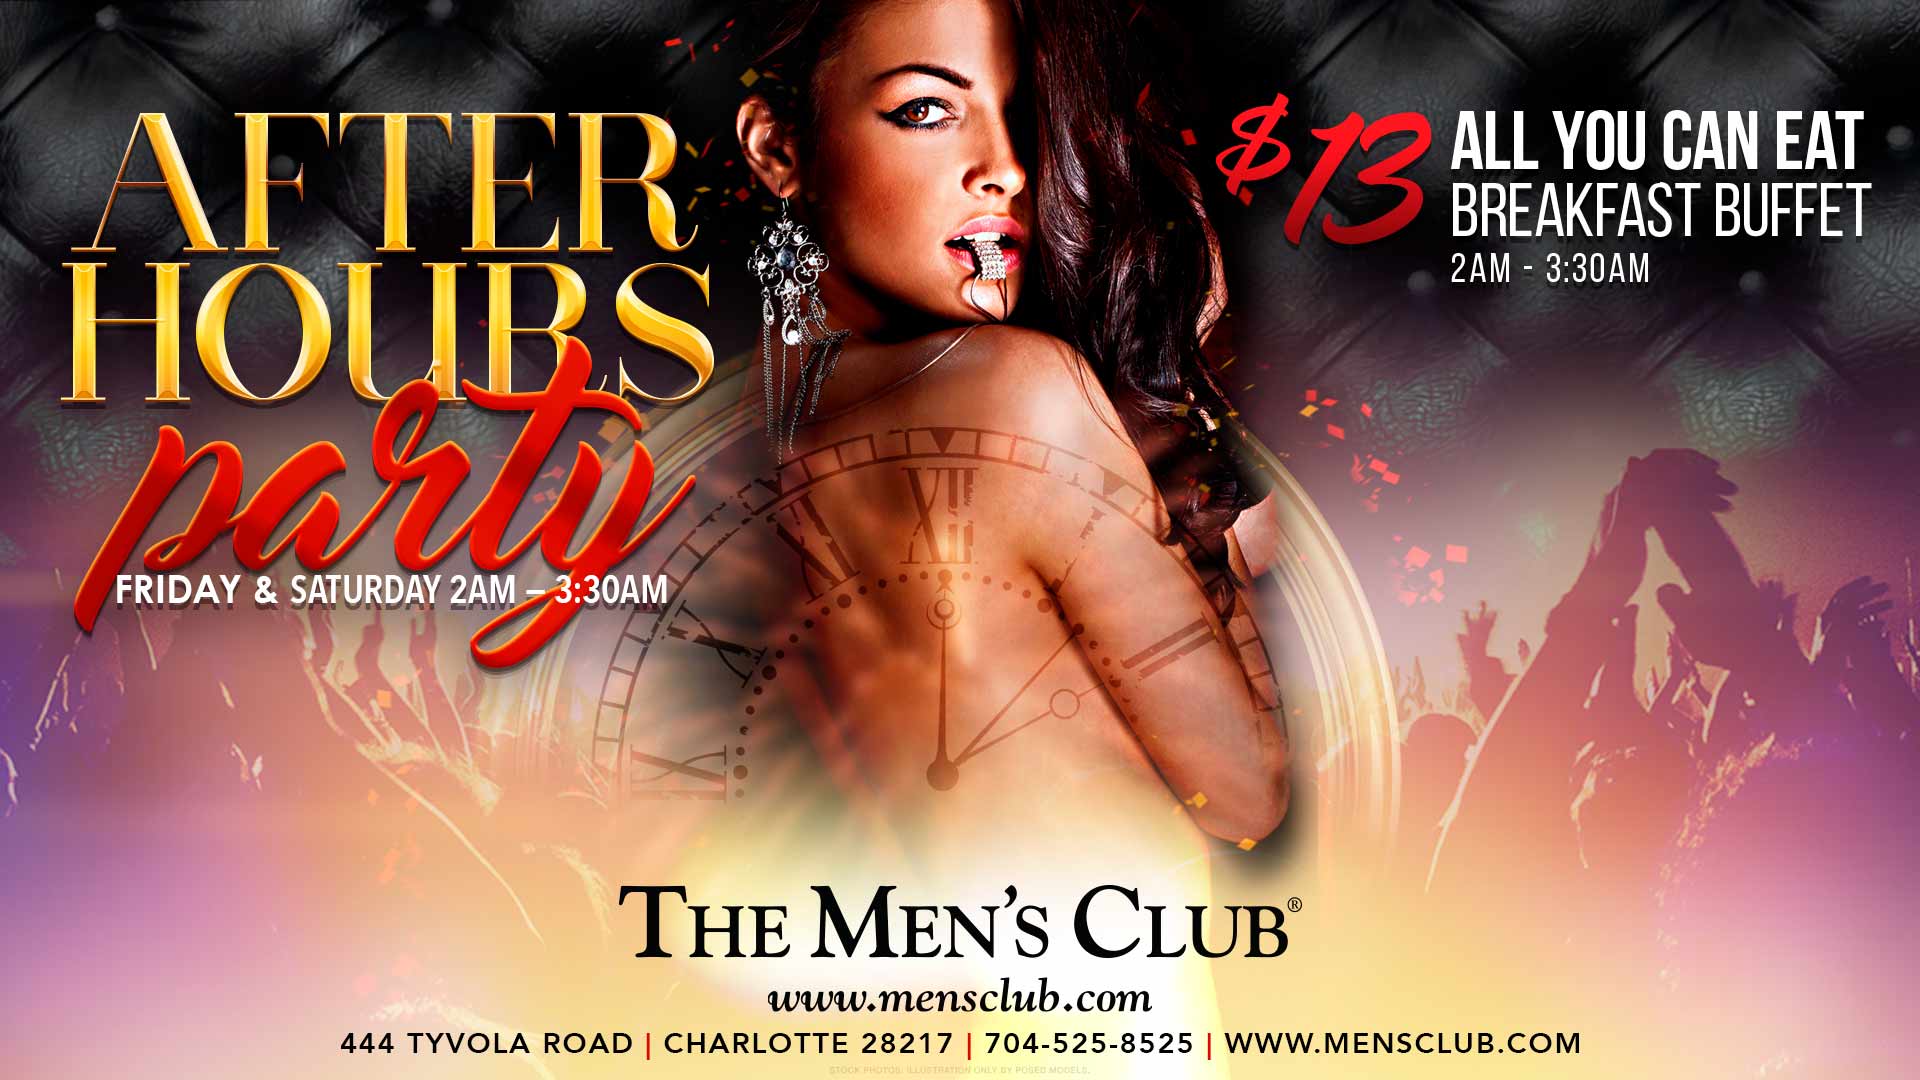 image of sexy woman bare backside promoting After Hours Party Friday and Saturday at The Men's Club of Charlotte